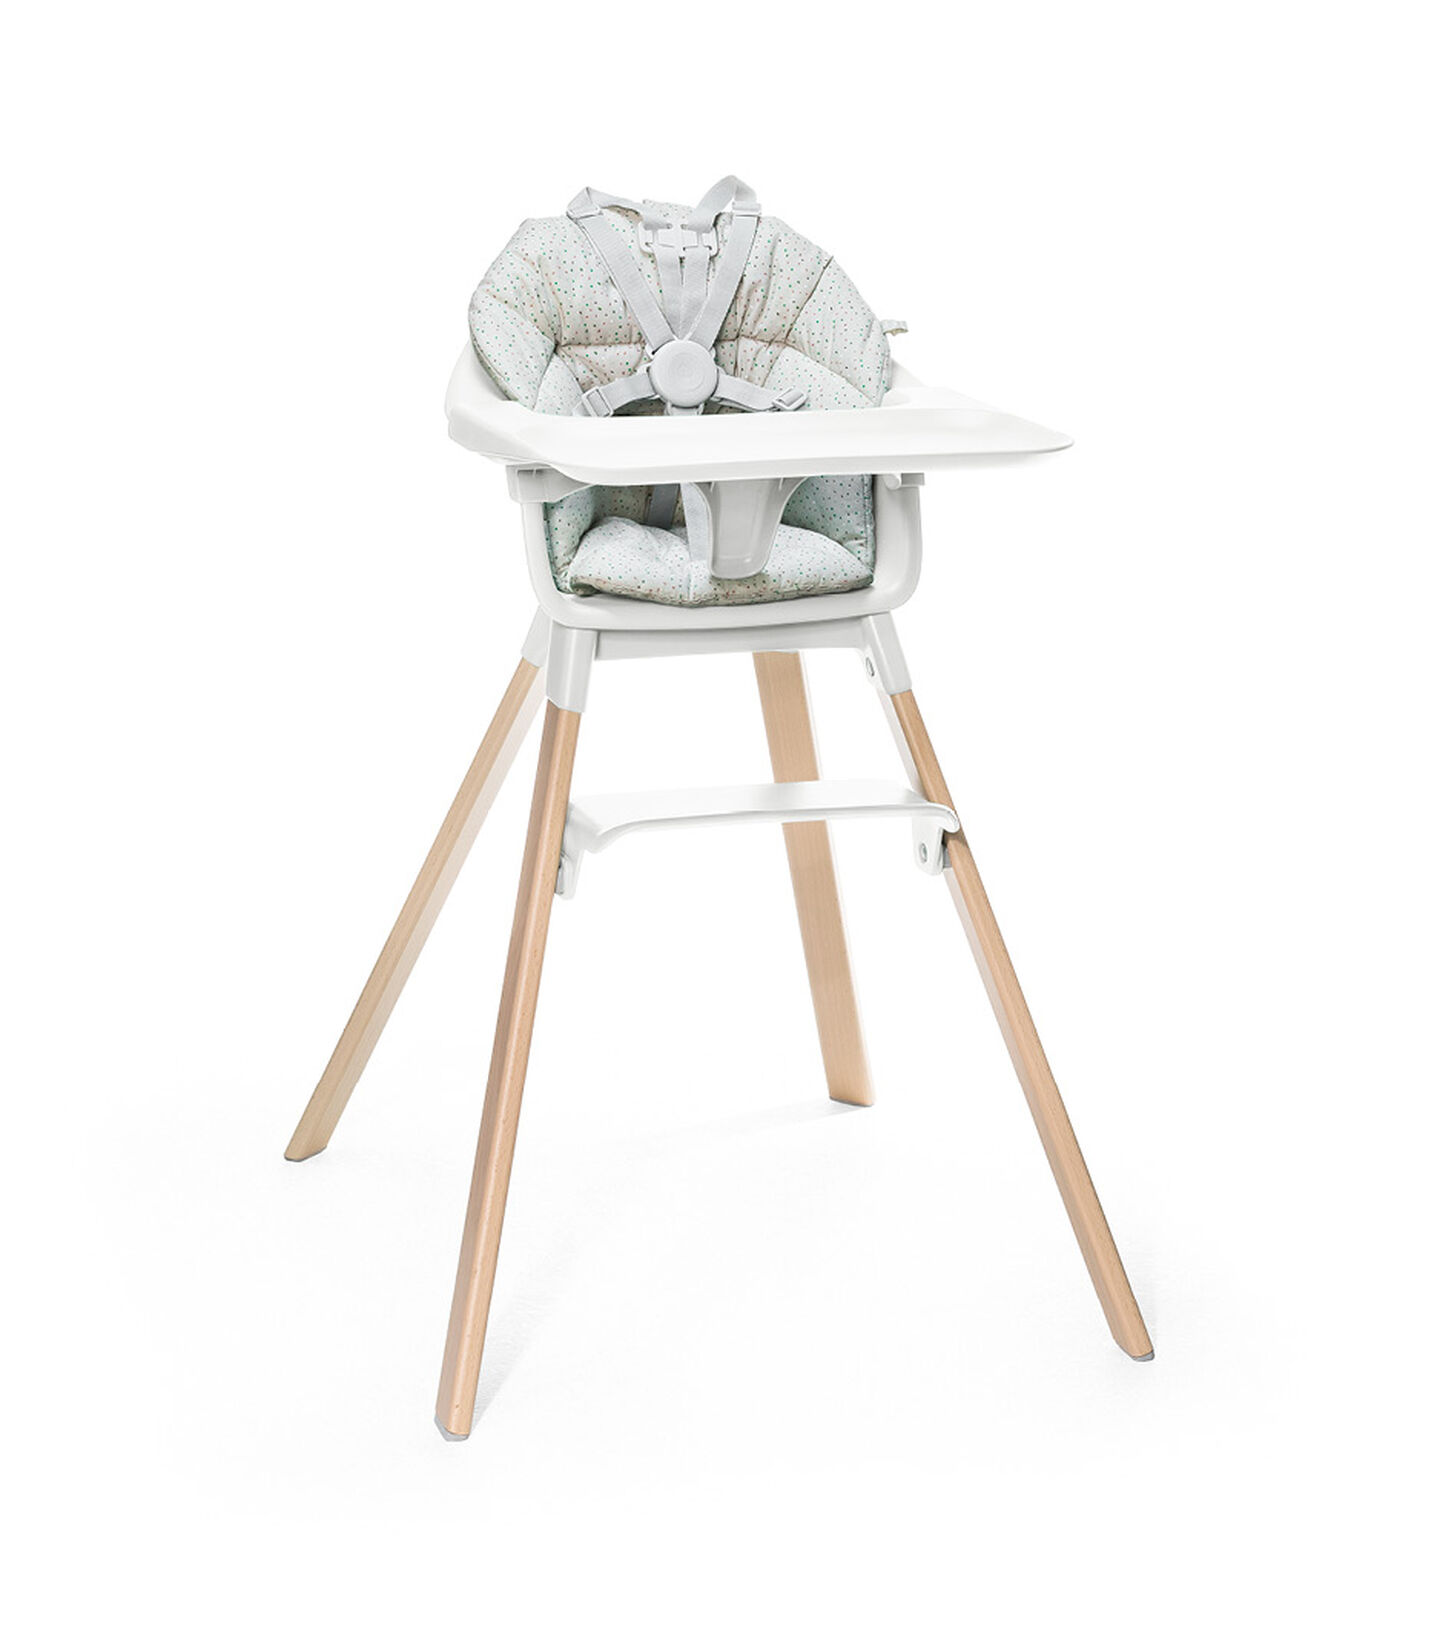 Stokke® Clikk™ High Chair. Natural Beech wood and White plastic parts including Tray. Cushion Grey Sprinkle and Harness. view 4